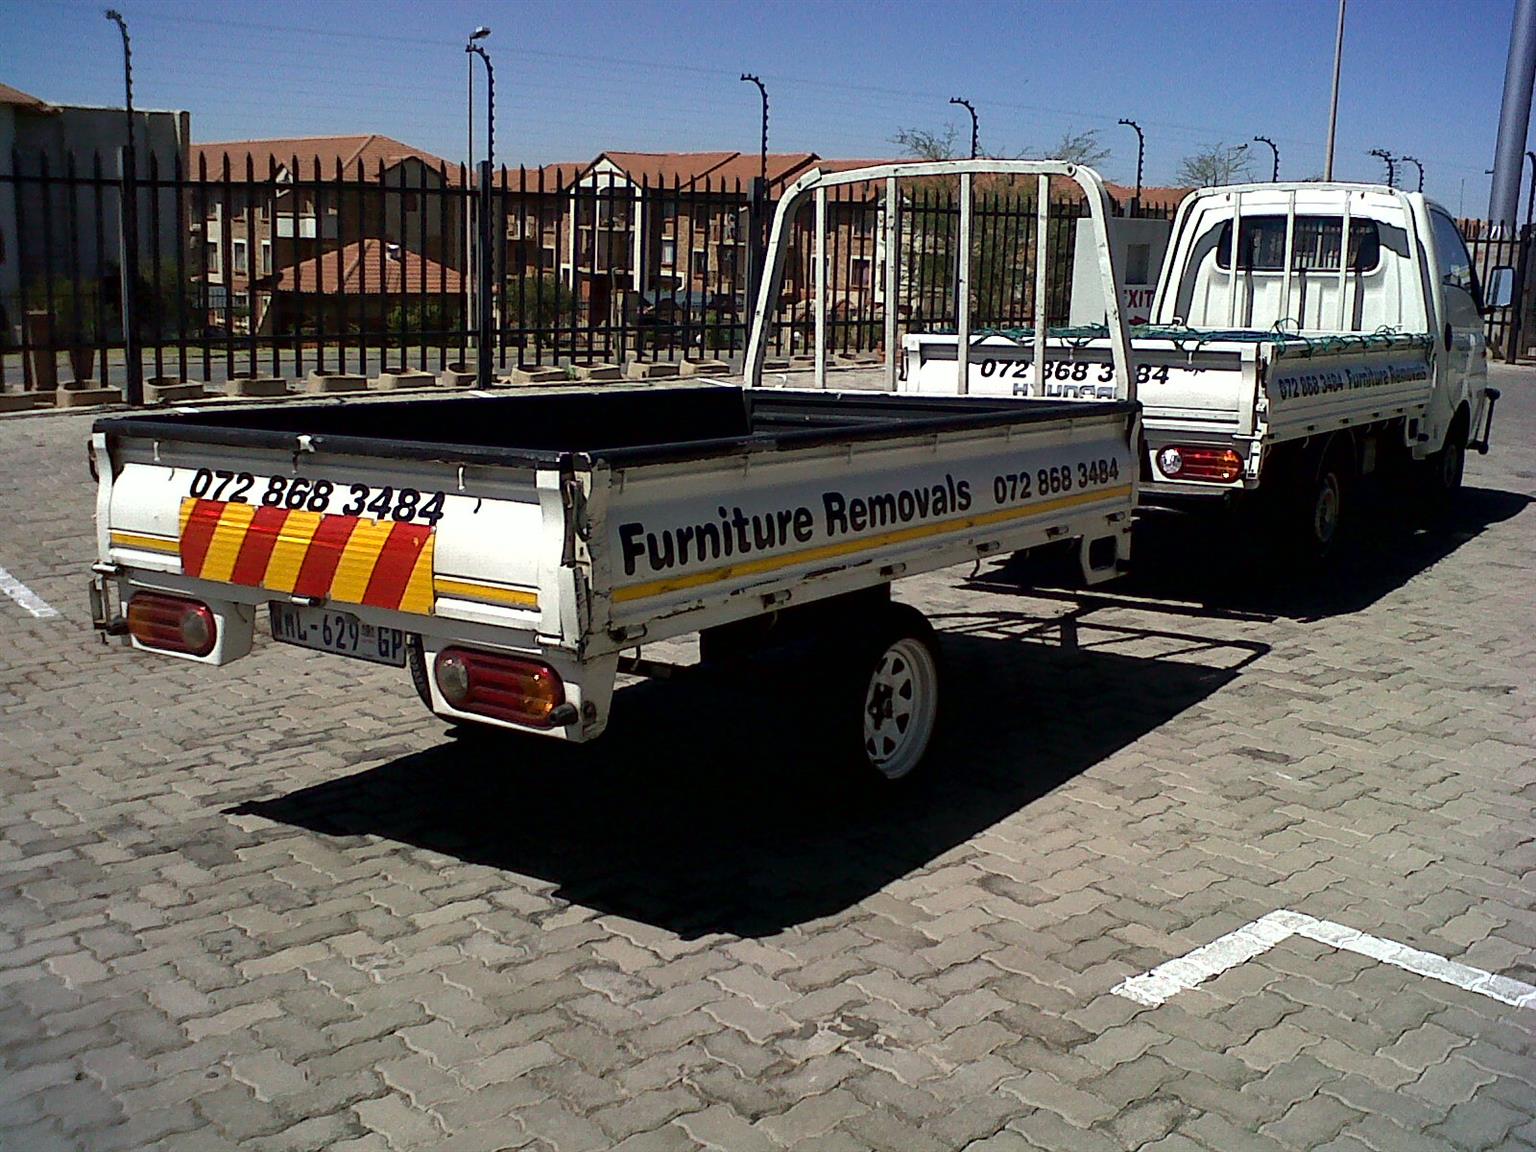 Furniture removals in Midrand 